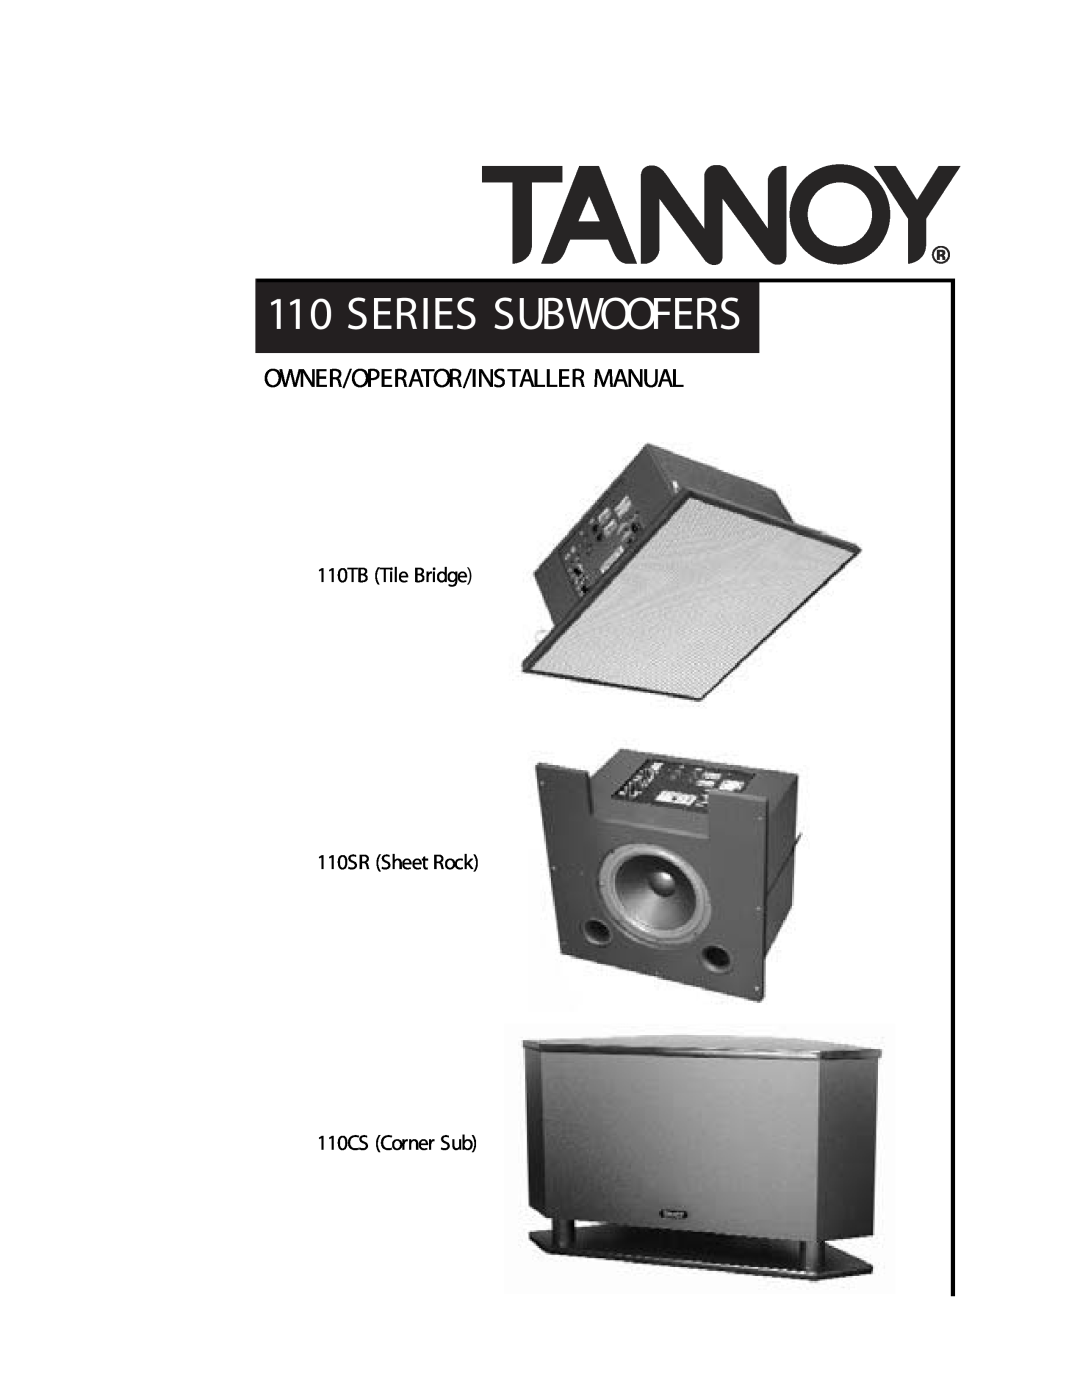 Tannoy SUBWOOFERS manual Owner/Operator/Installer Manual, Series Subwoofers 